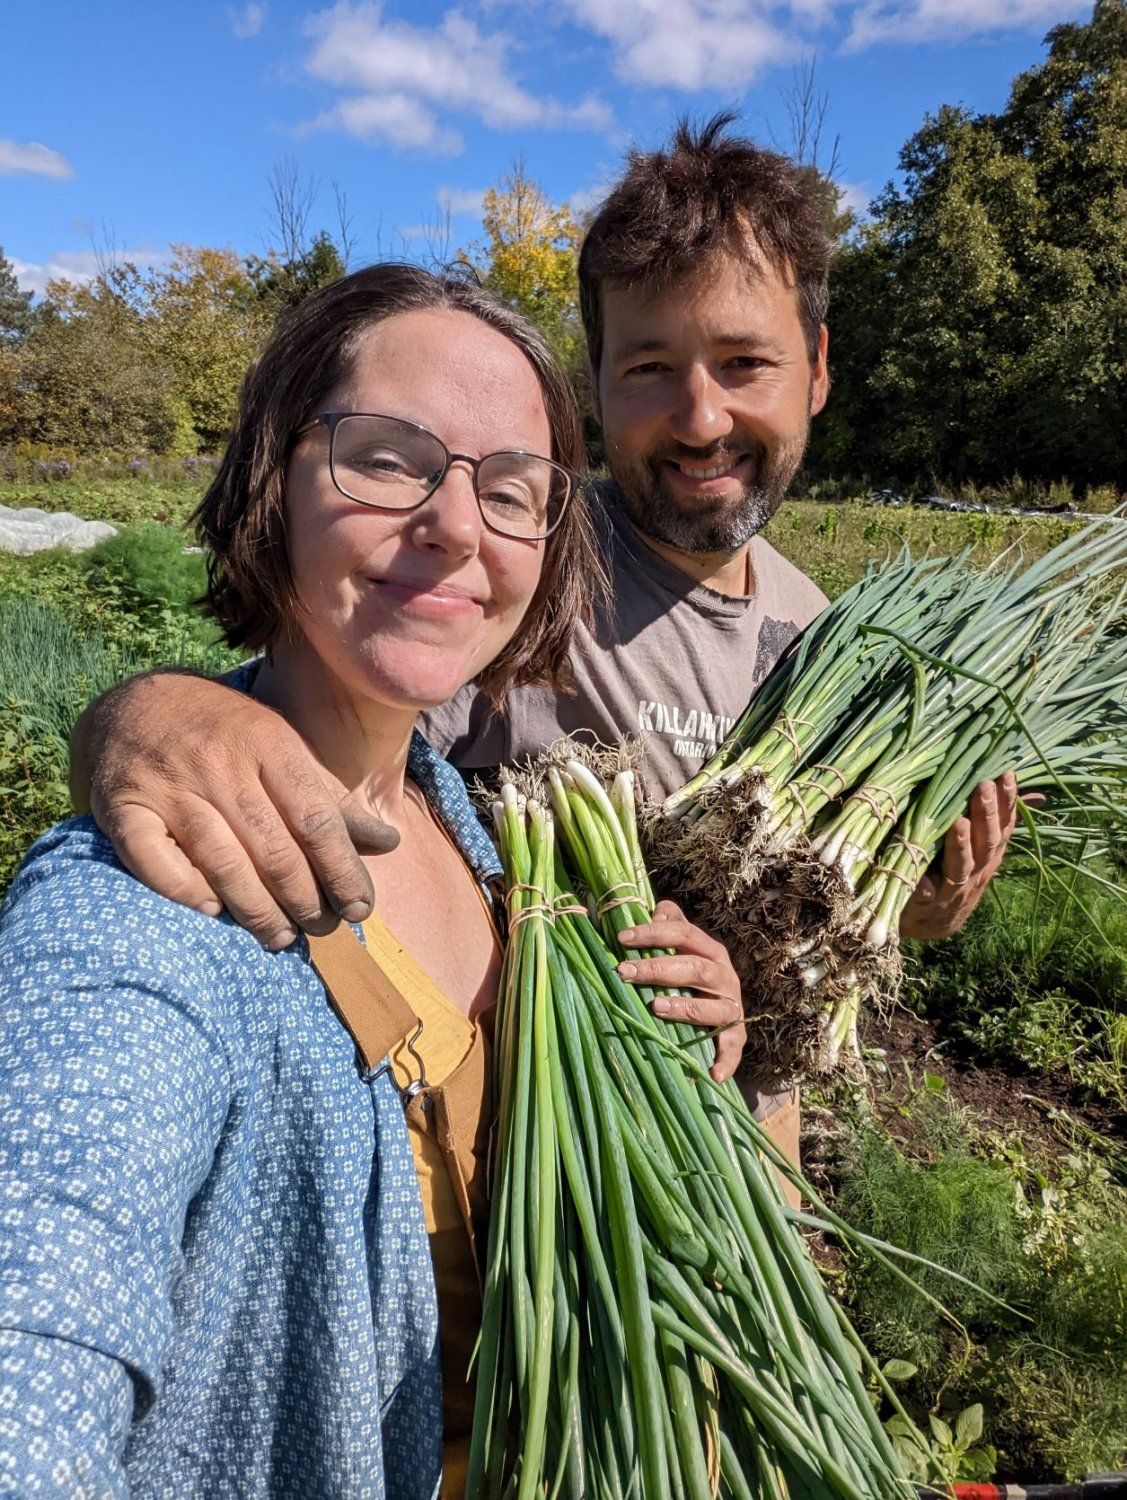 Previous Happening: 2022 Farm Share Week 17 - Fall Is Here